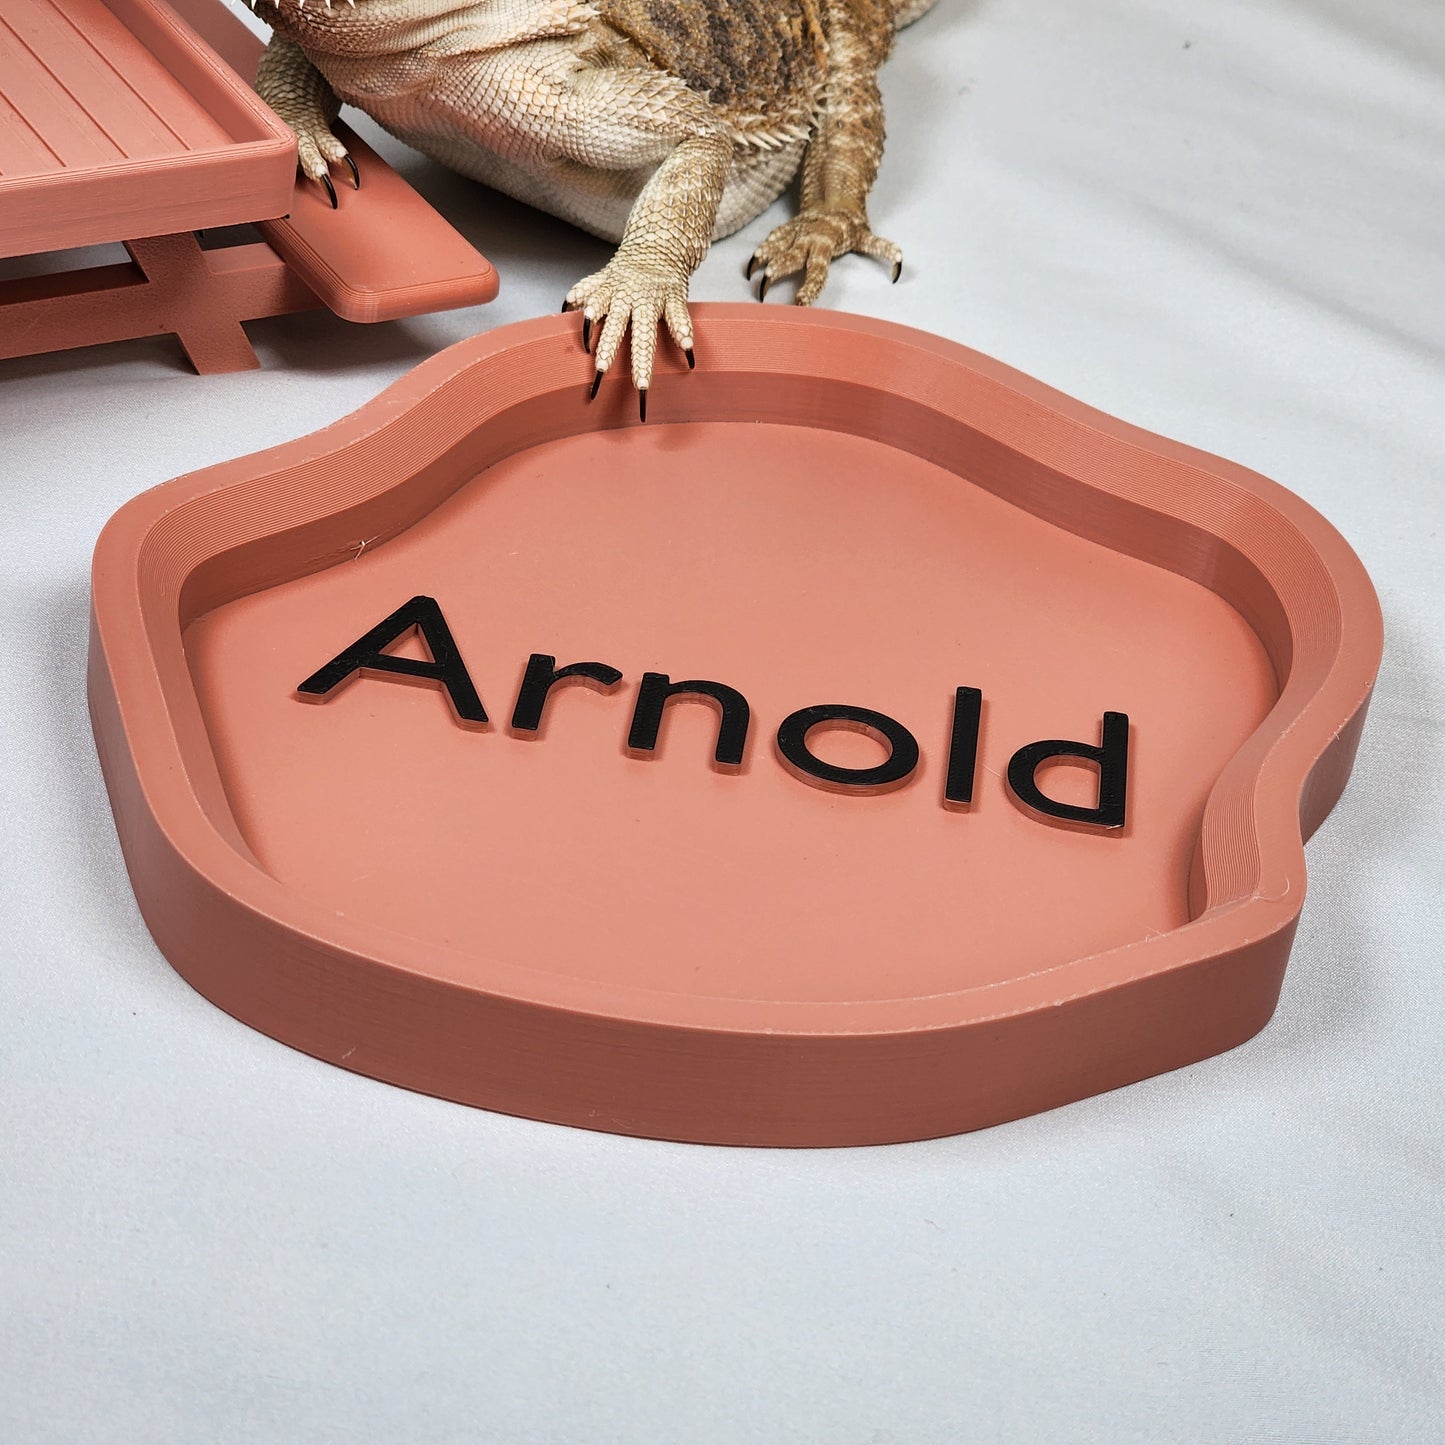 Desert Themed Large Personalized Water feeding dish for Bearded Dragons and other reptiles